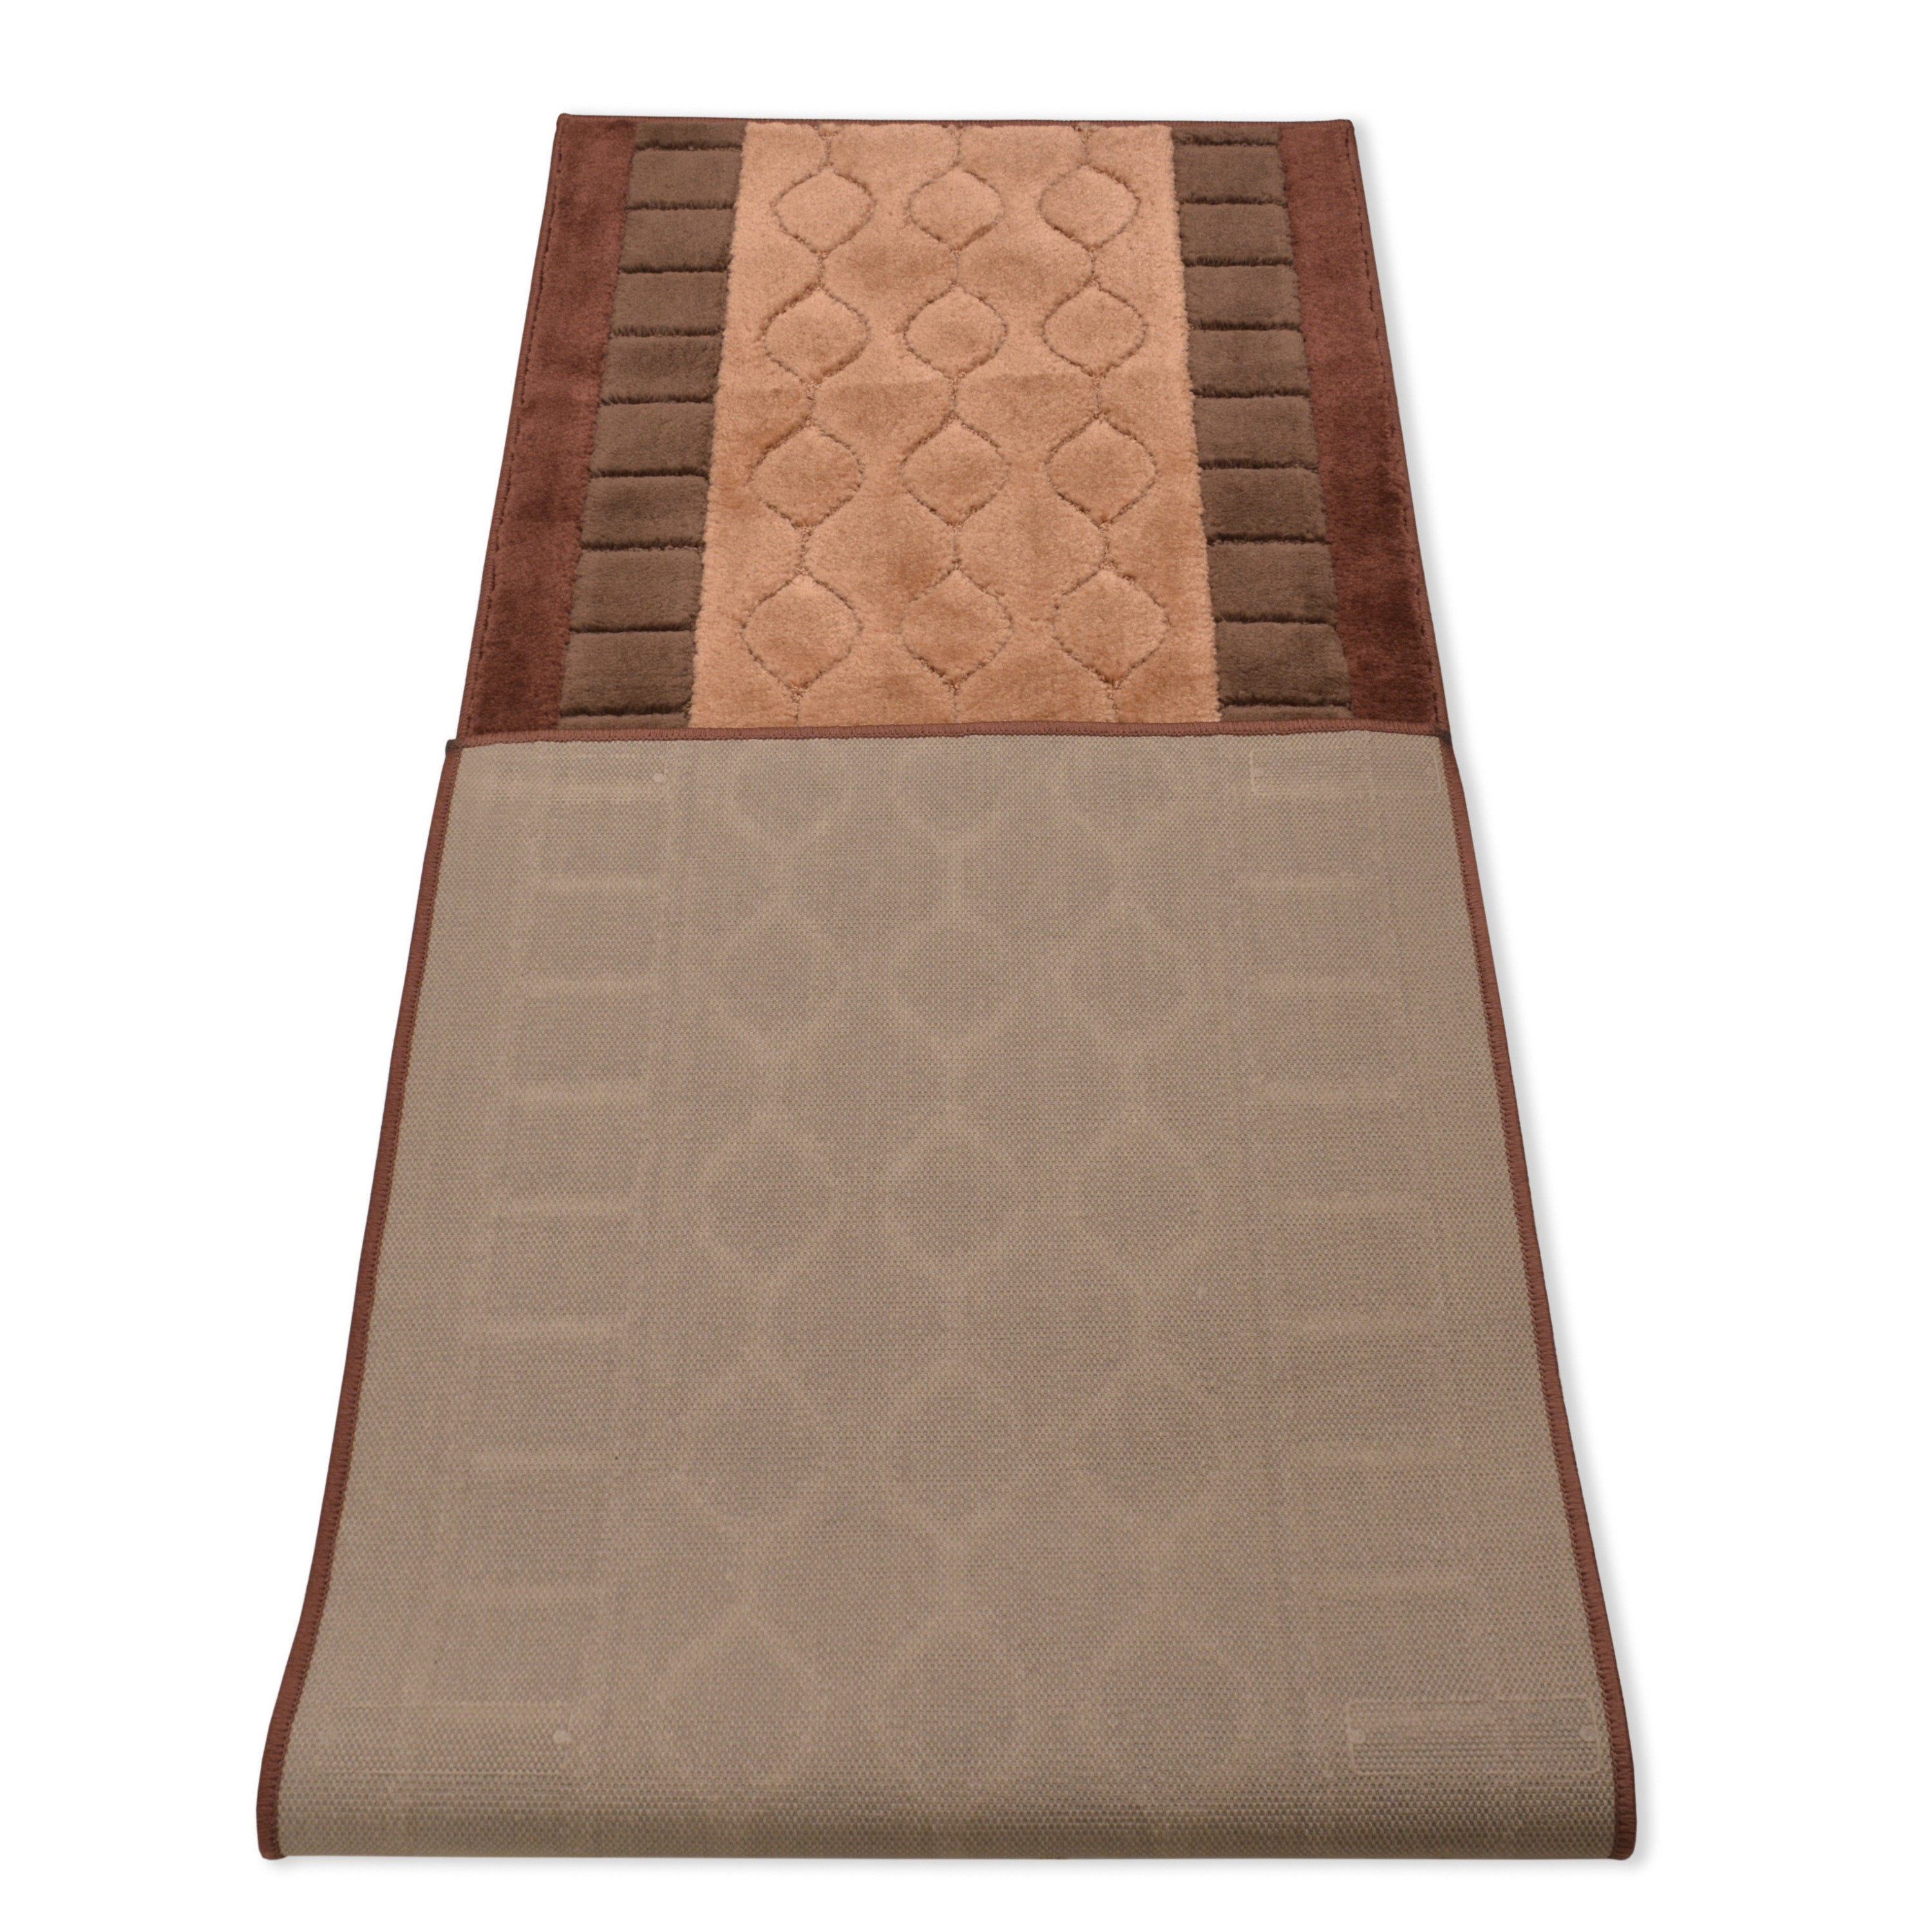 Custom Size Runner Rug Volley Circle Beige-Brown Color Skid Resistant Rug Runner Customize Up to 50 Feet and 26 Inch Width Cut to Size Rugs-5